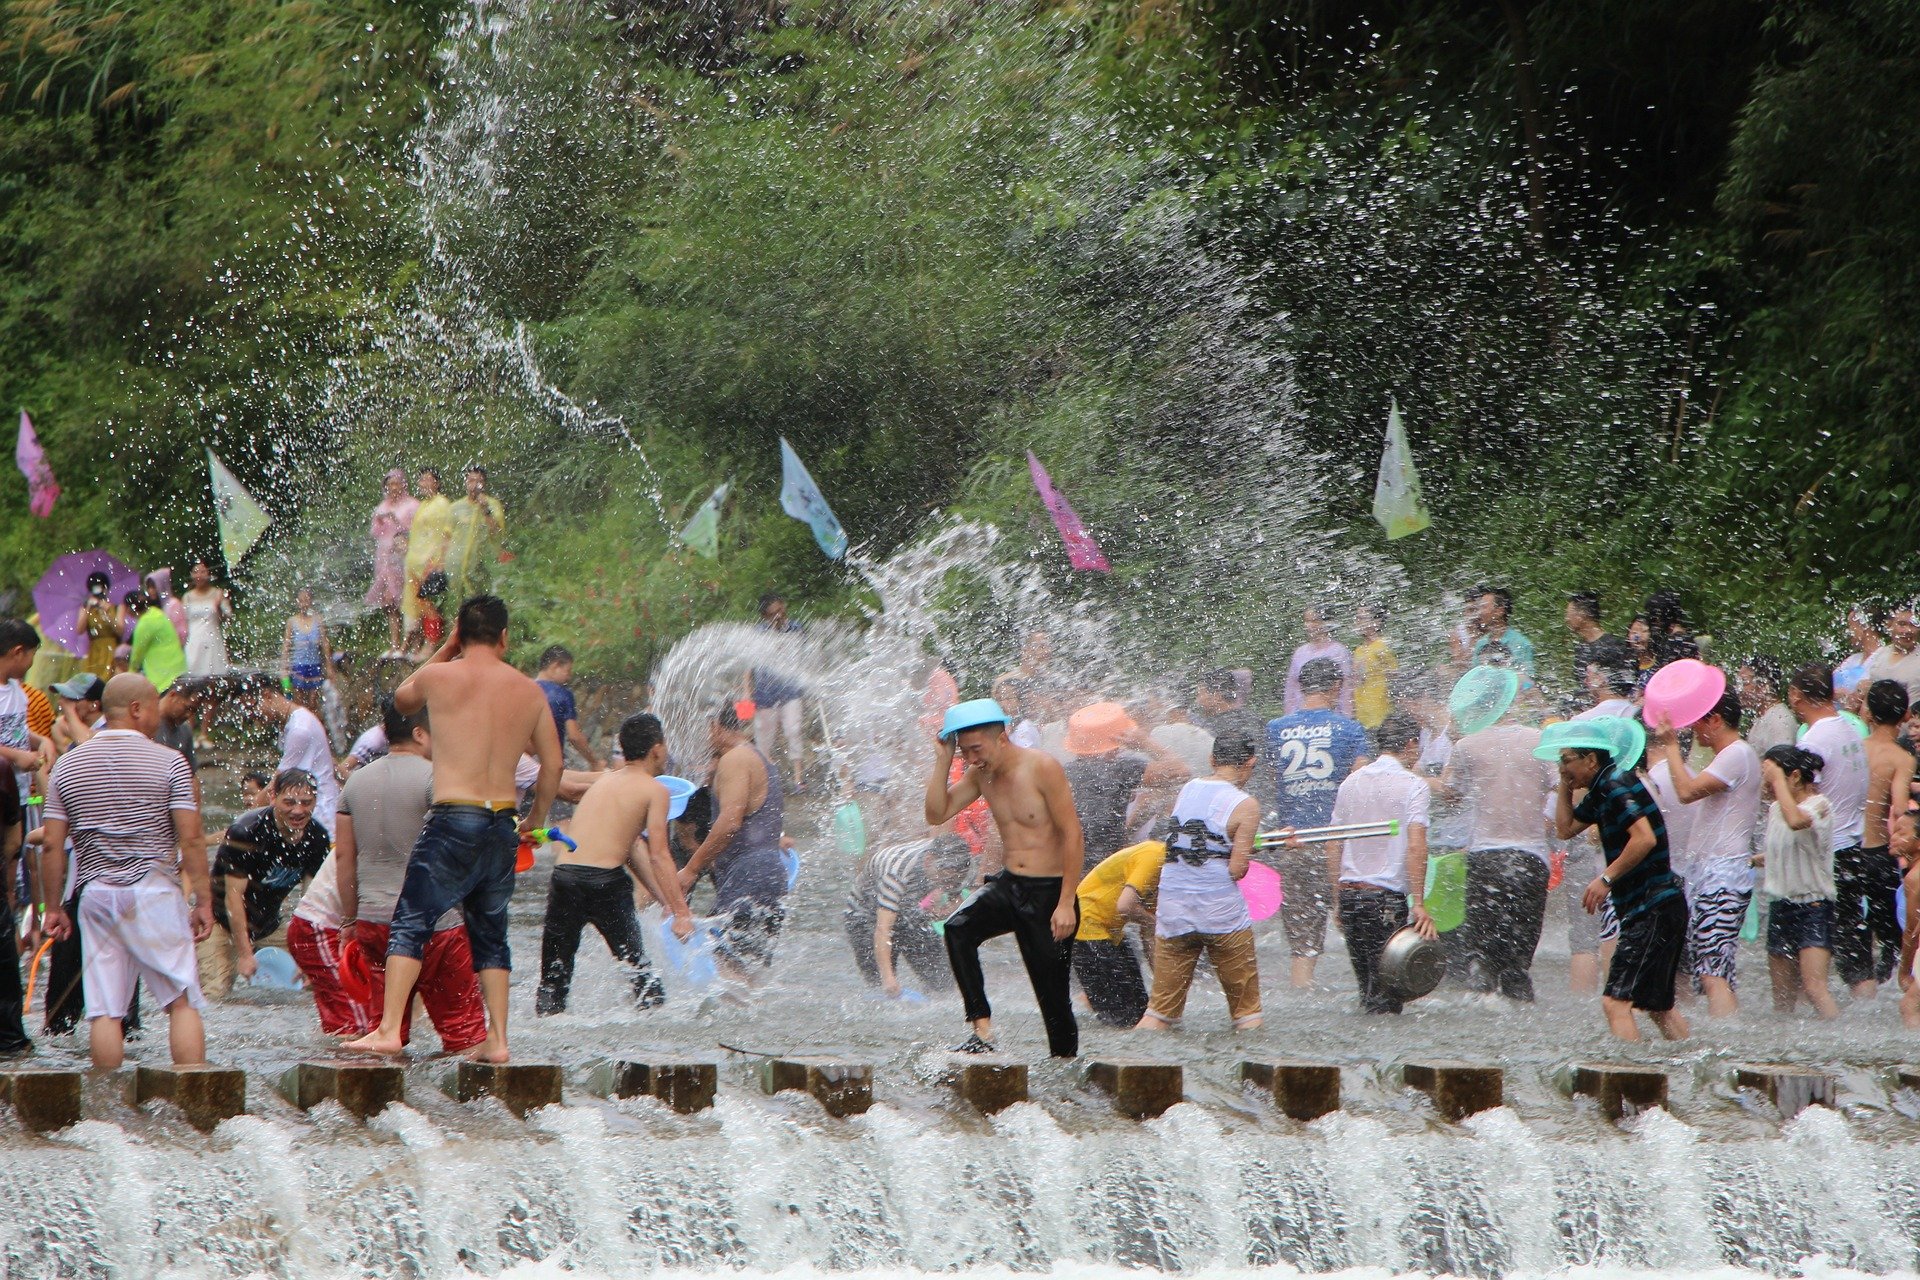 Sustainable celebration of Songkran Festival in Thailand on the riverside